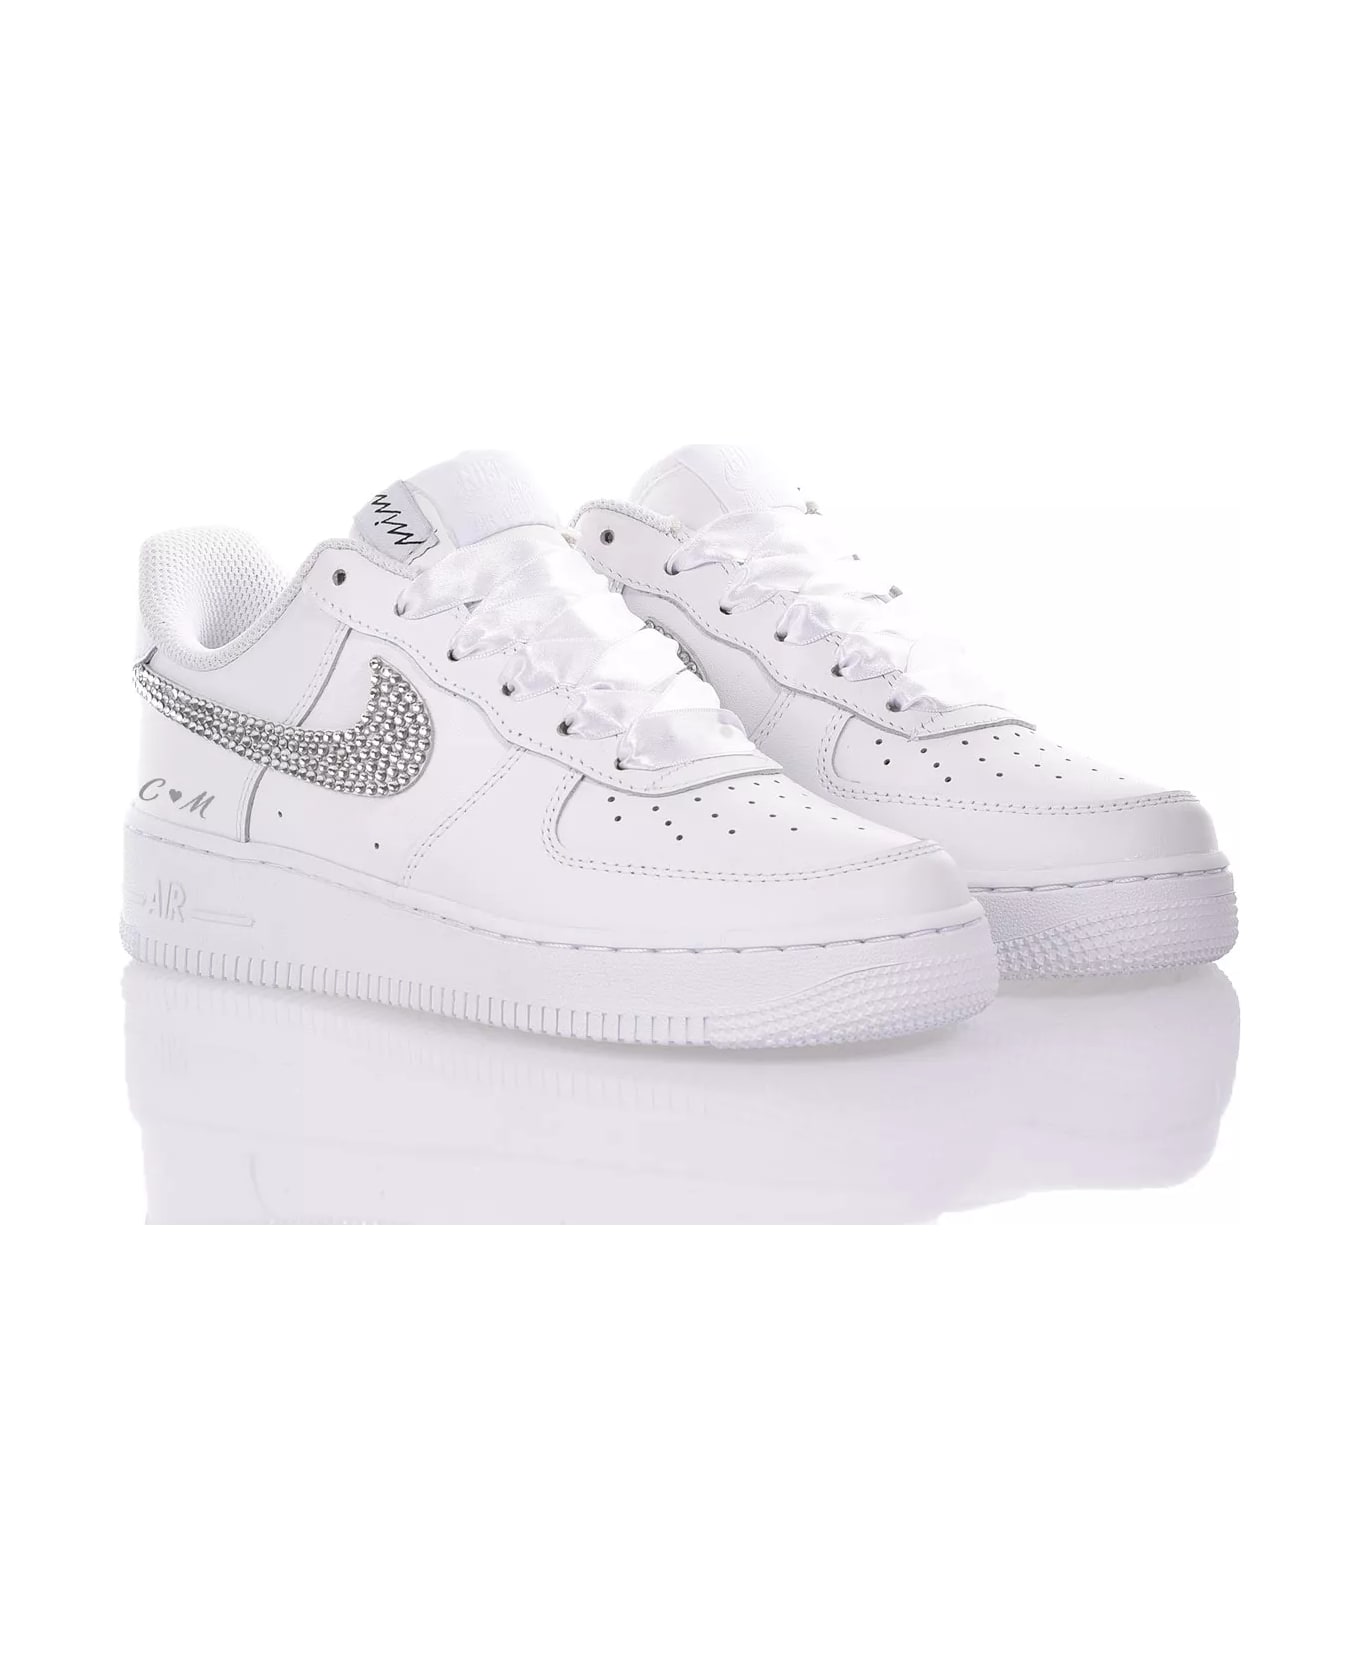 Mimanera Nike Air Force 1 For Wedding